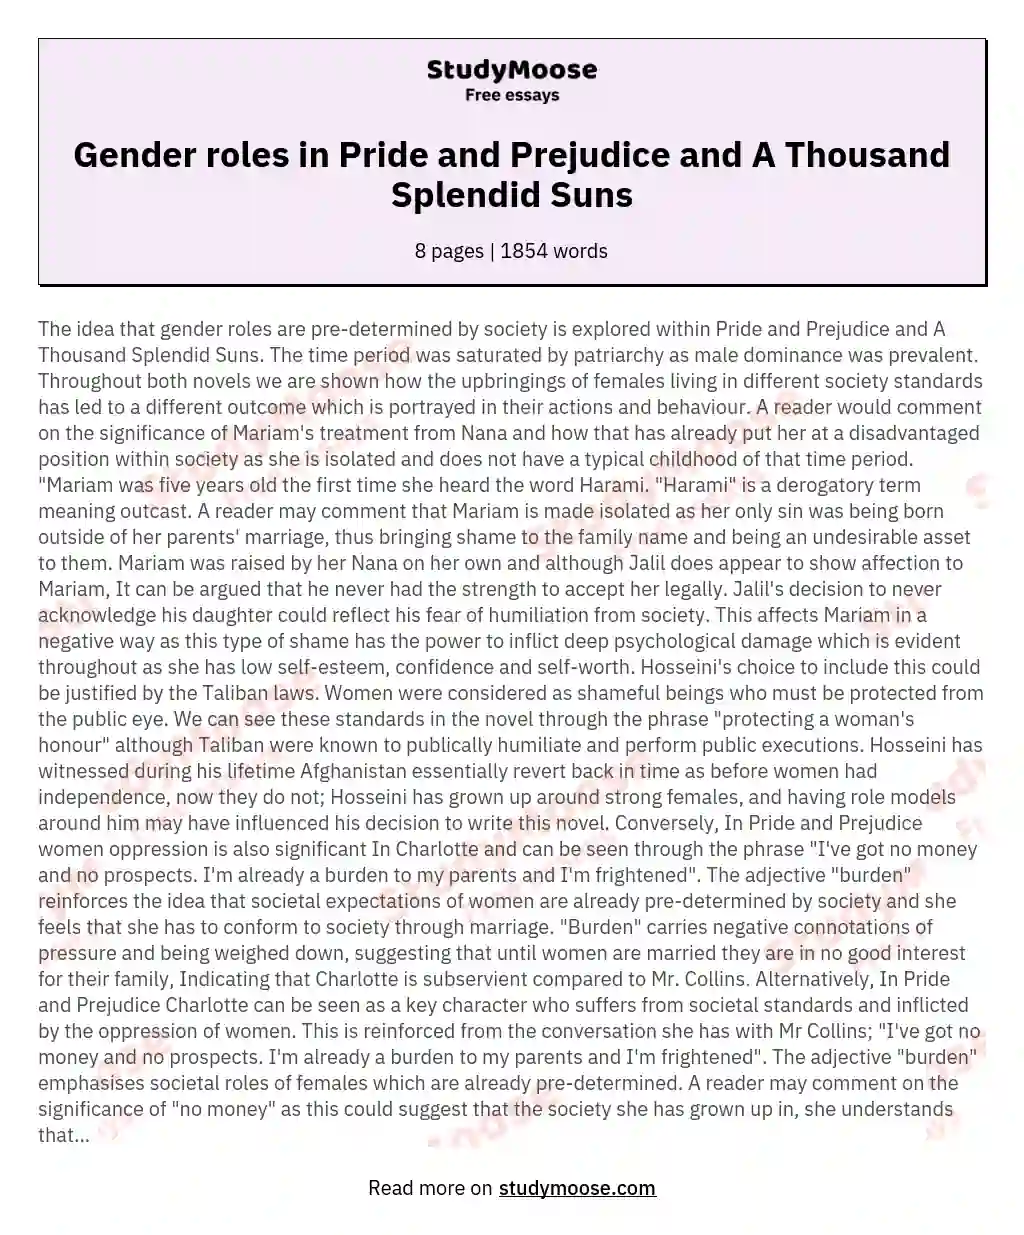 Gender roles in Pride and Prejudice and A Thousand Splendid Suns